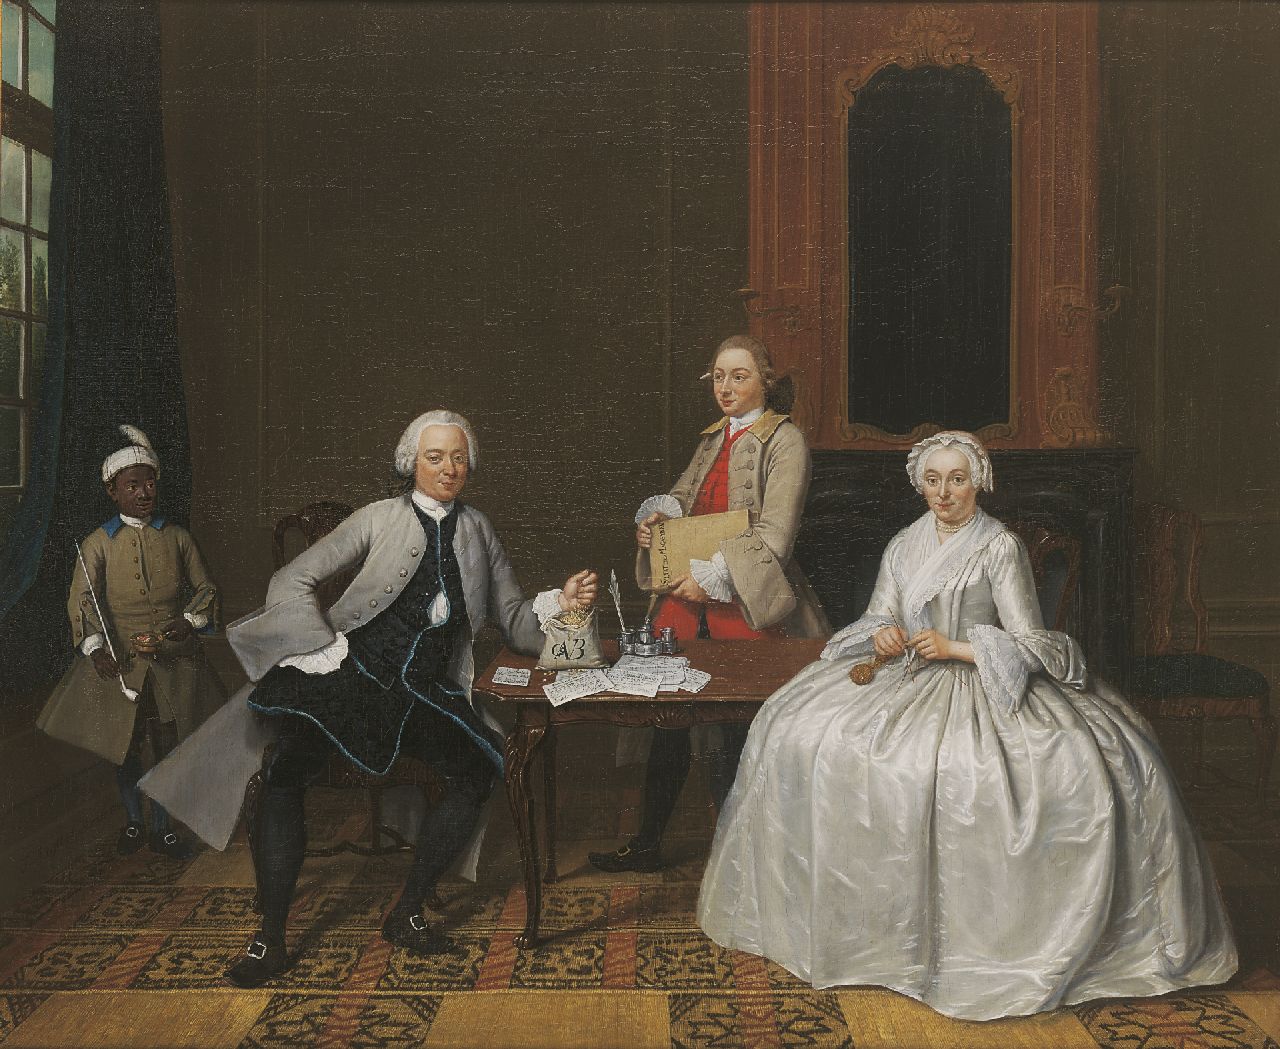 Regters T.  | Tibout Regters, Merchant and banker Gijsbrecht Antwerpen Verbrugge van Freyhoff, his wife Maria Hooft, the bookkeeper and a black servant, Öl auf Leinwand 68,0 x 82,7 cm, signed l.l. und dated 1750